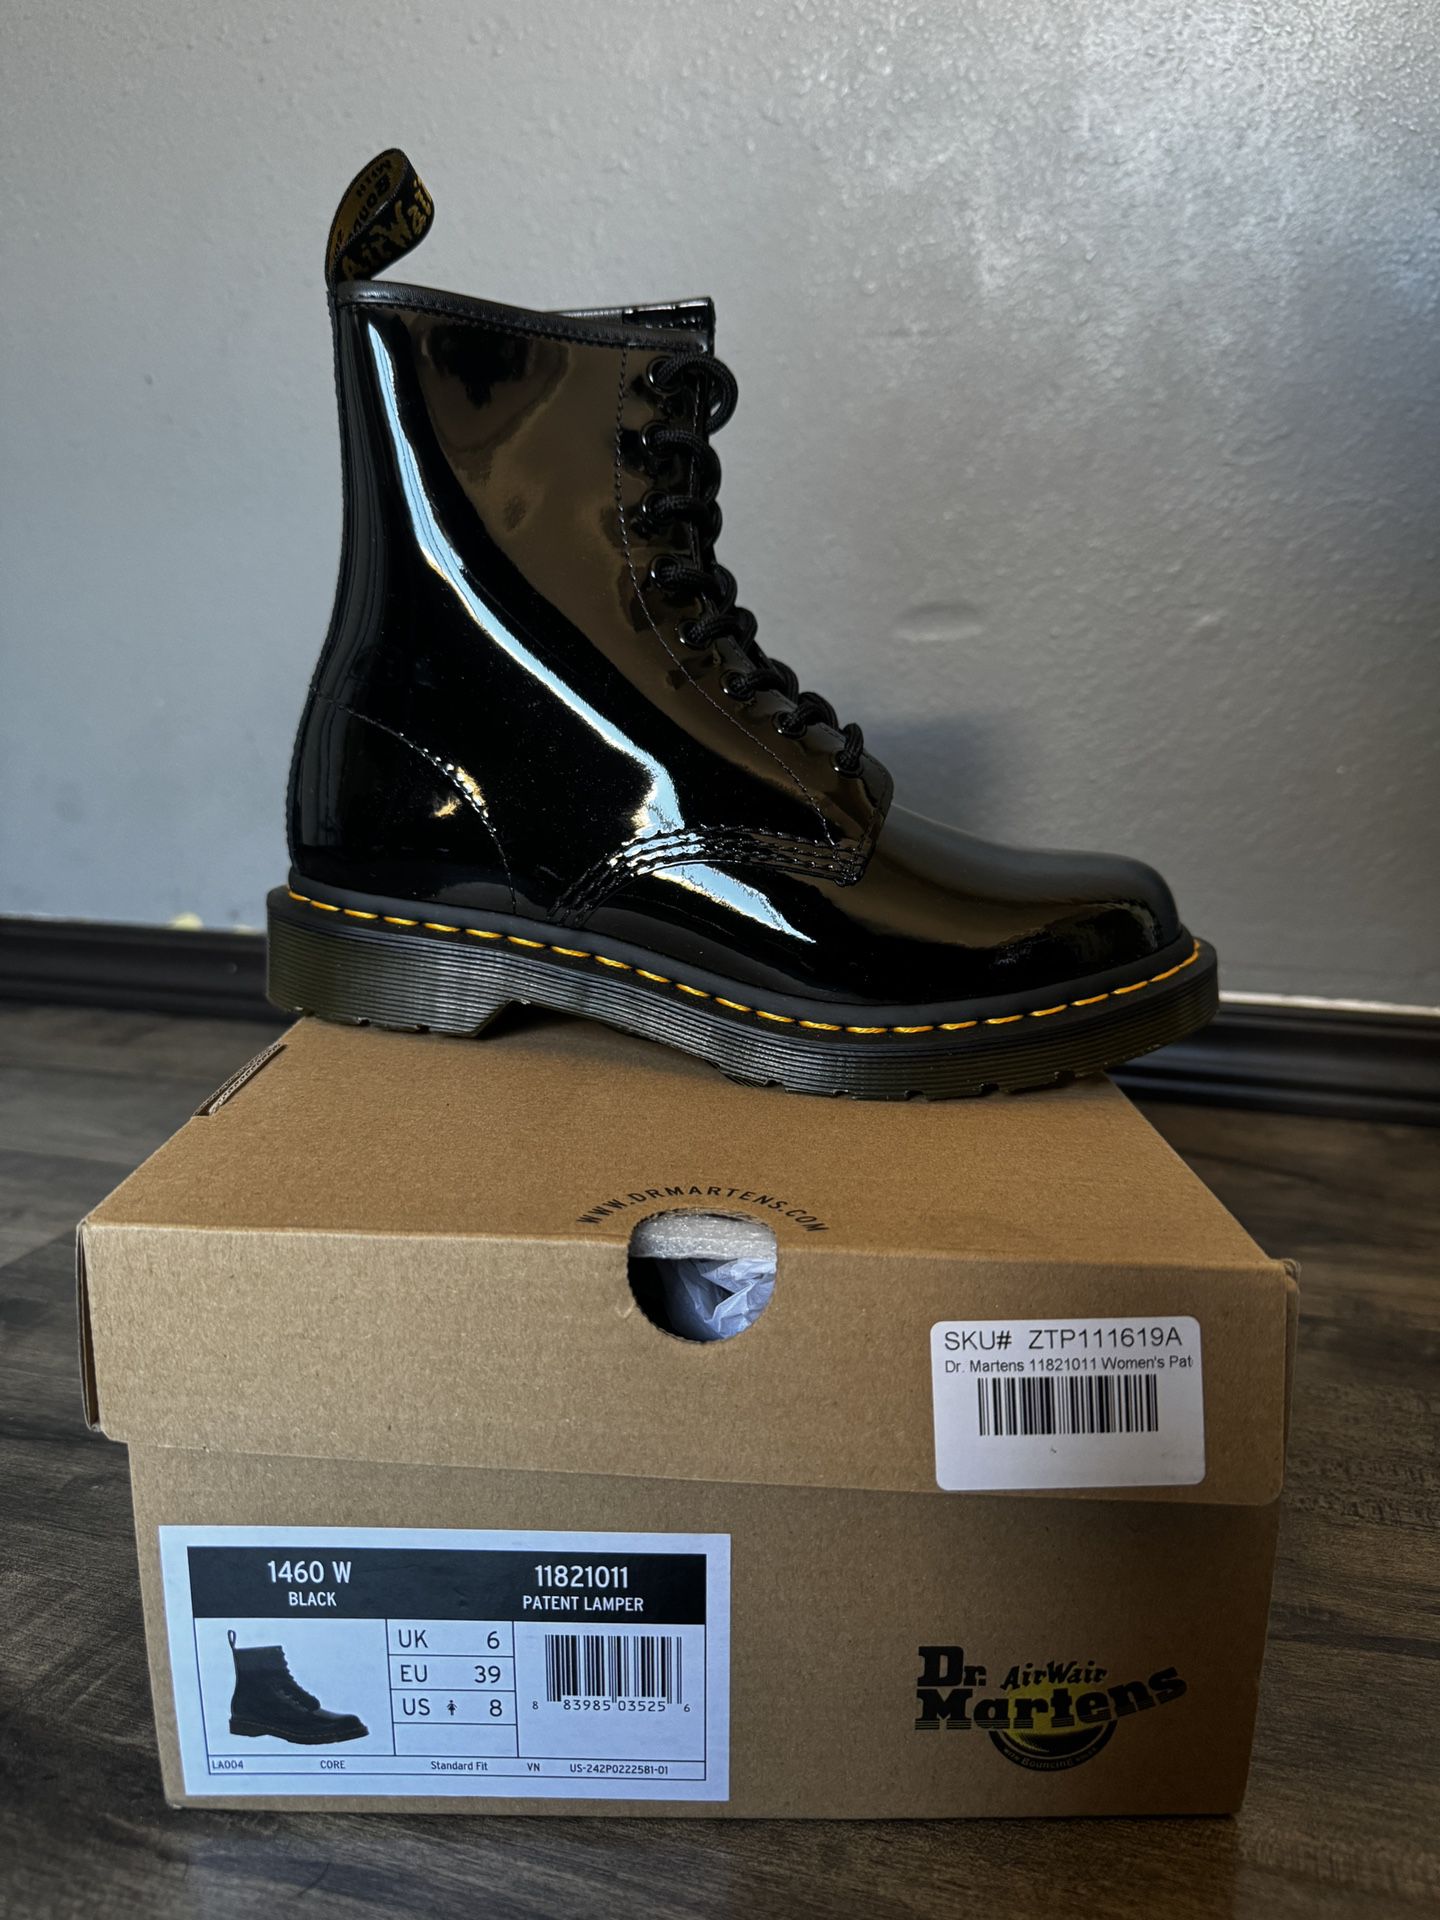 Dr. Martens Women's 1460 8-Eye Leather Boots Size 8 